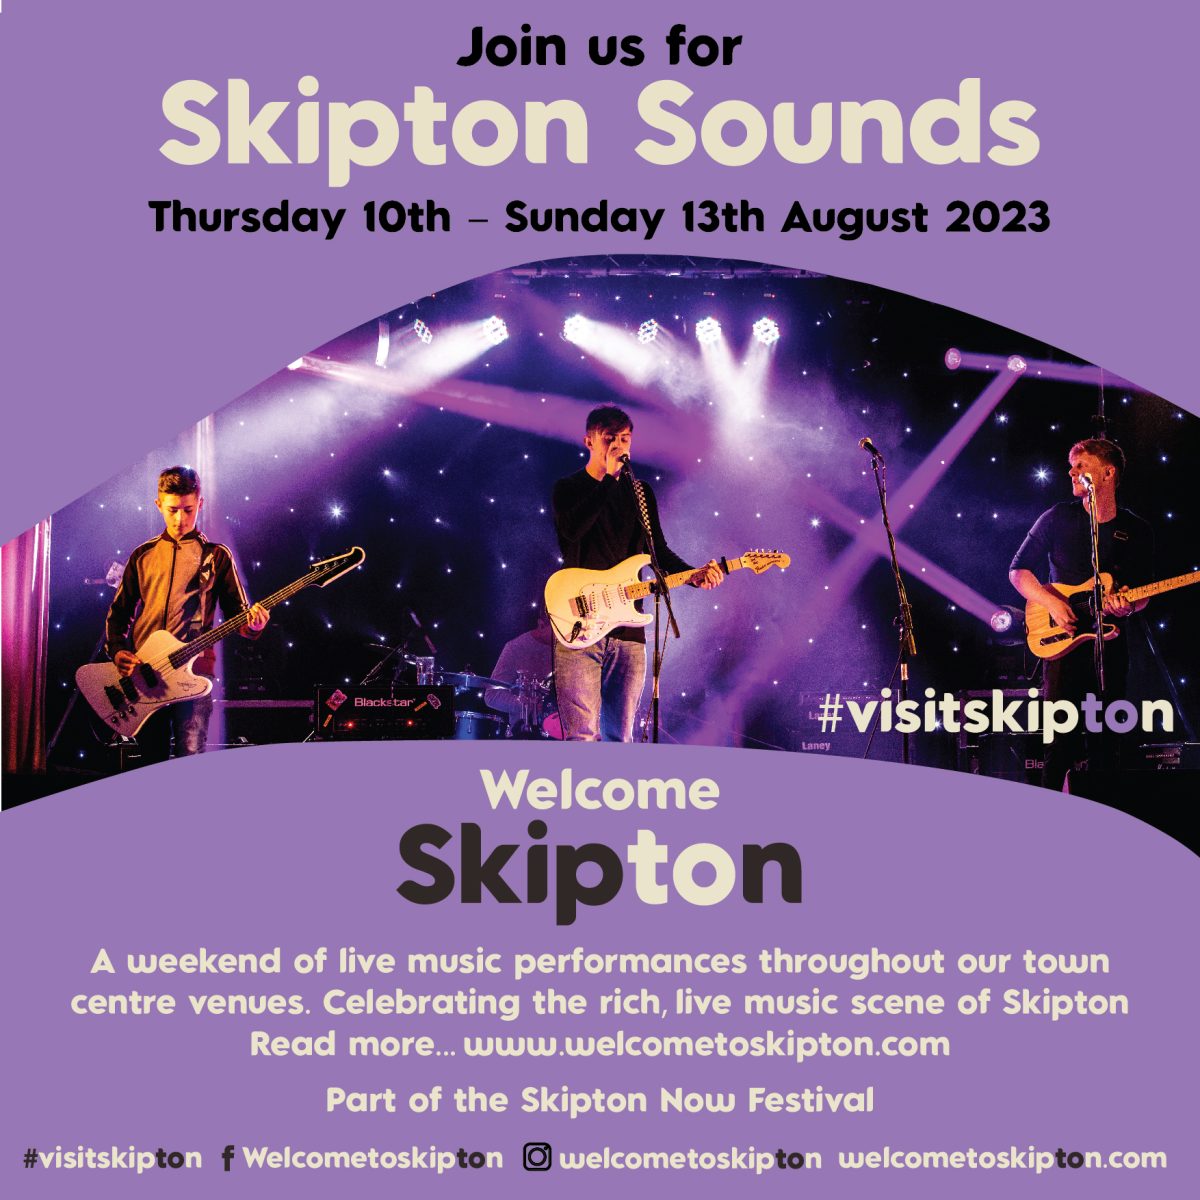 Visit Skipton this weekend for a long weekend of music